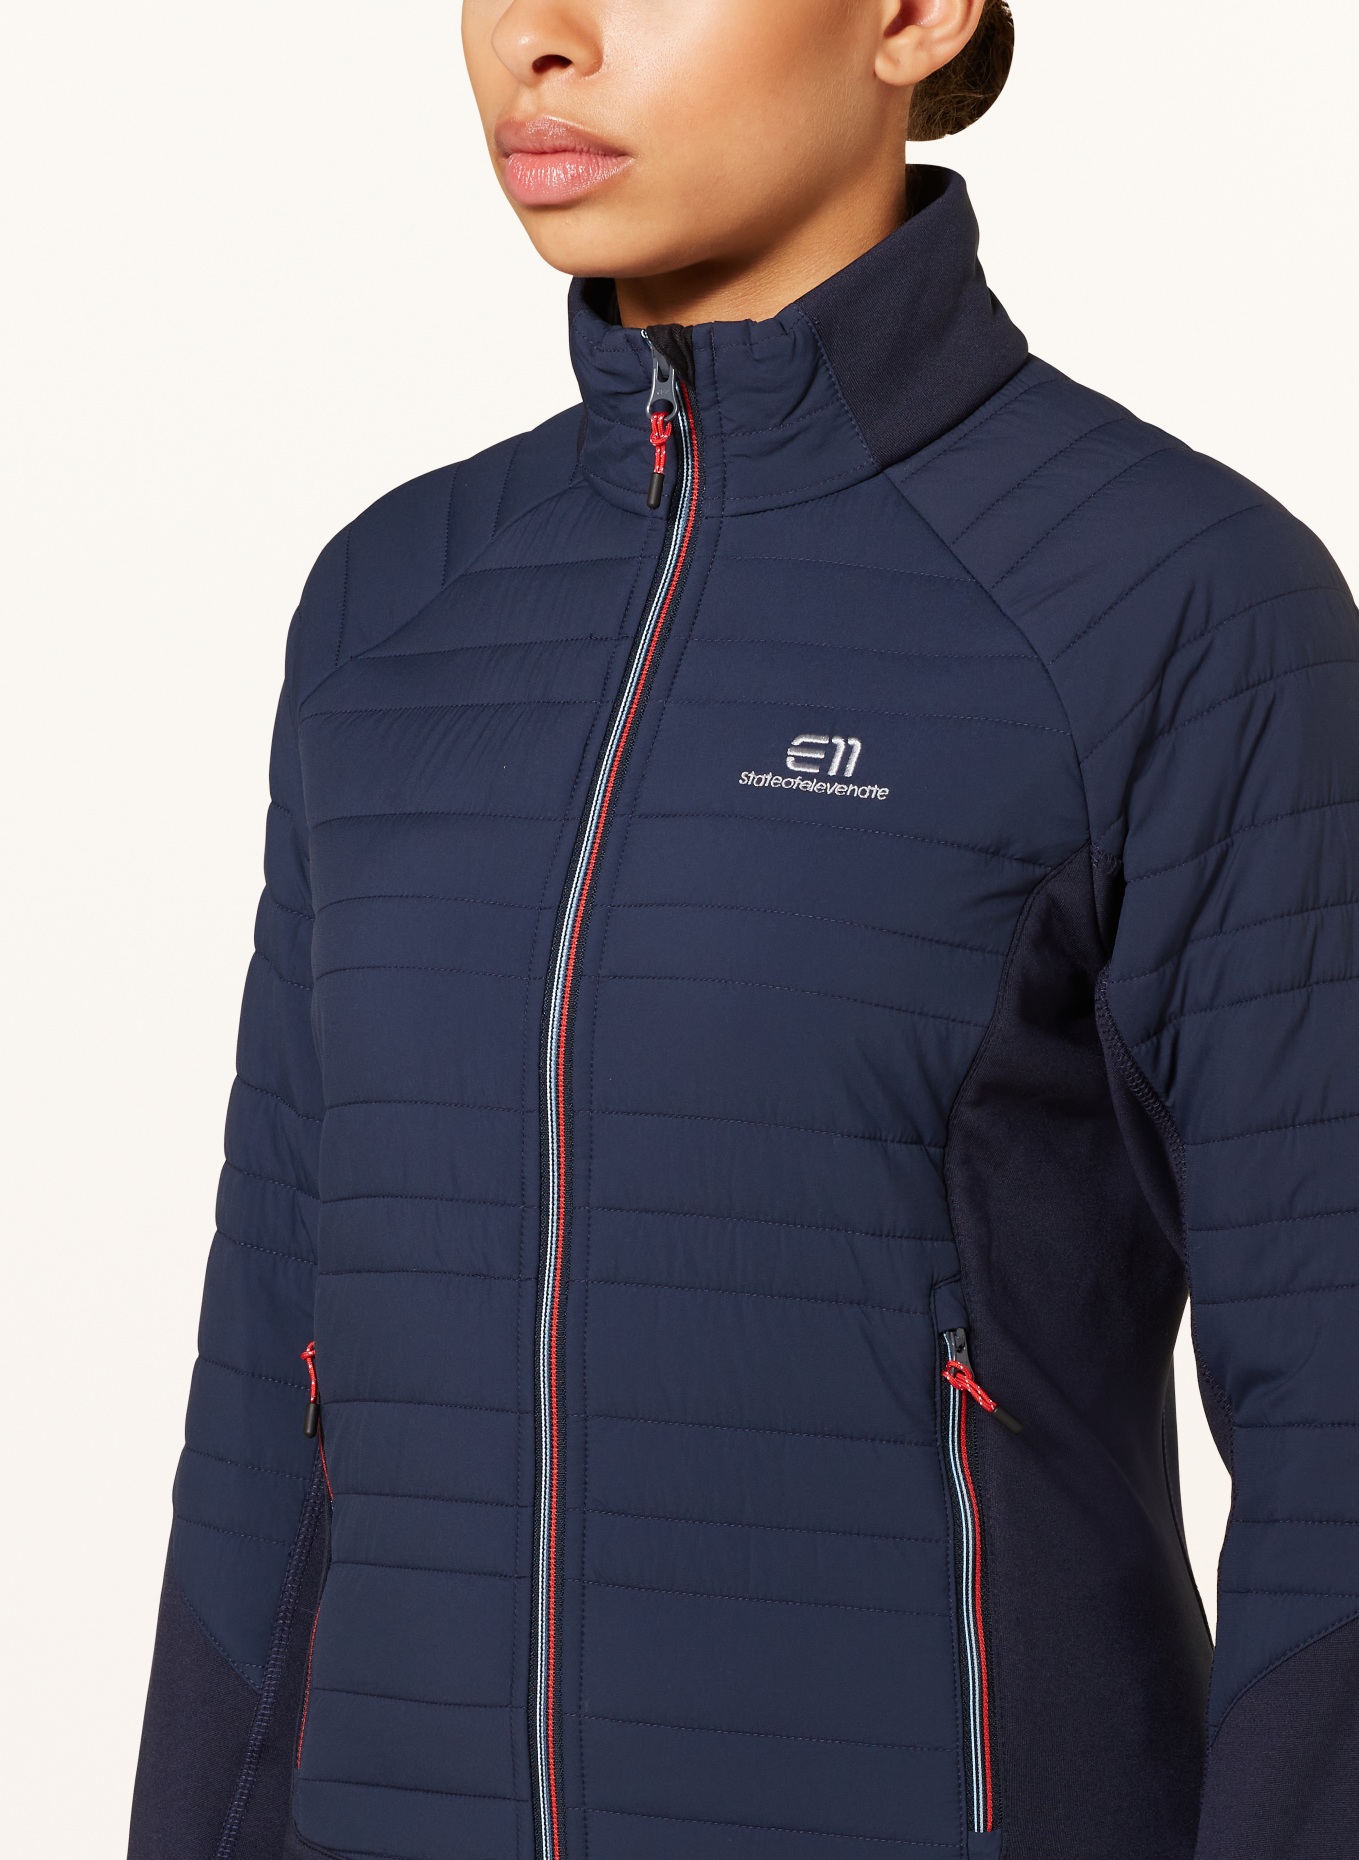 state of elevenate Mid-layer jacket FUSION, Color: DARK BLUE (Image 4)